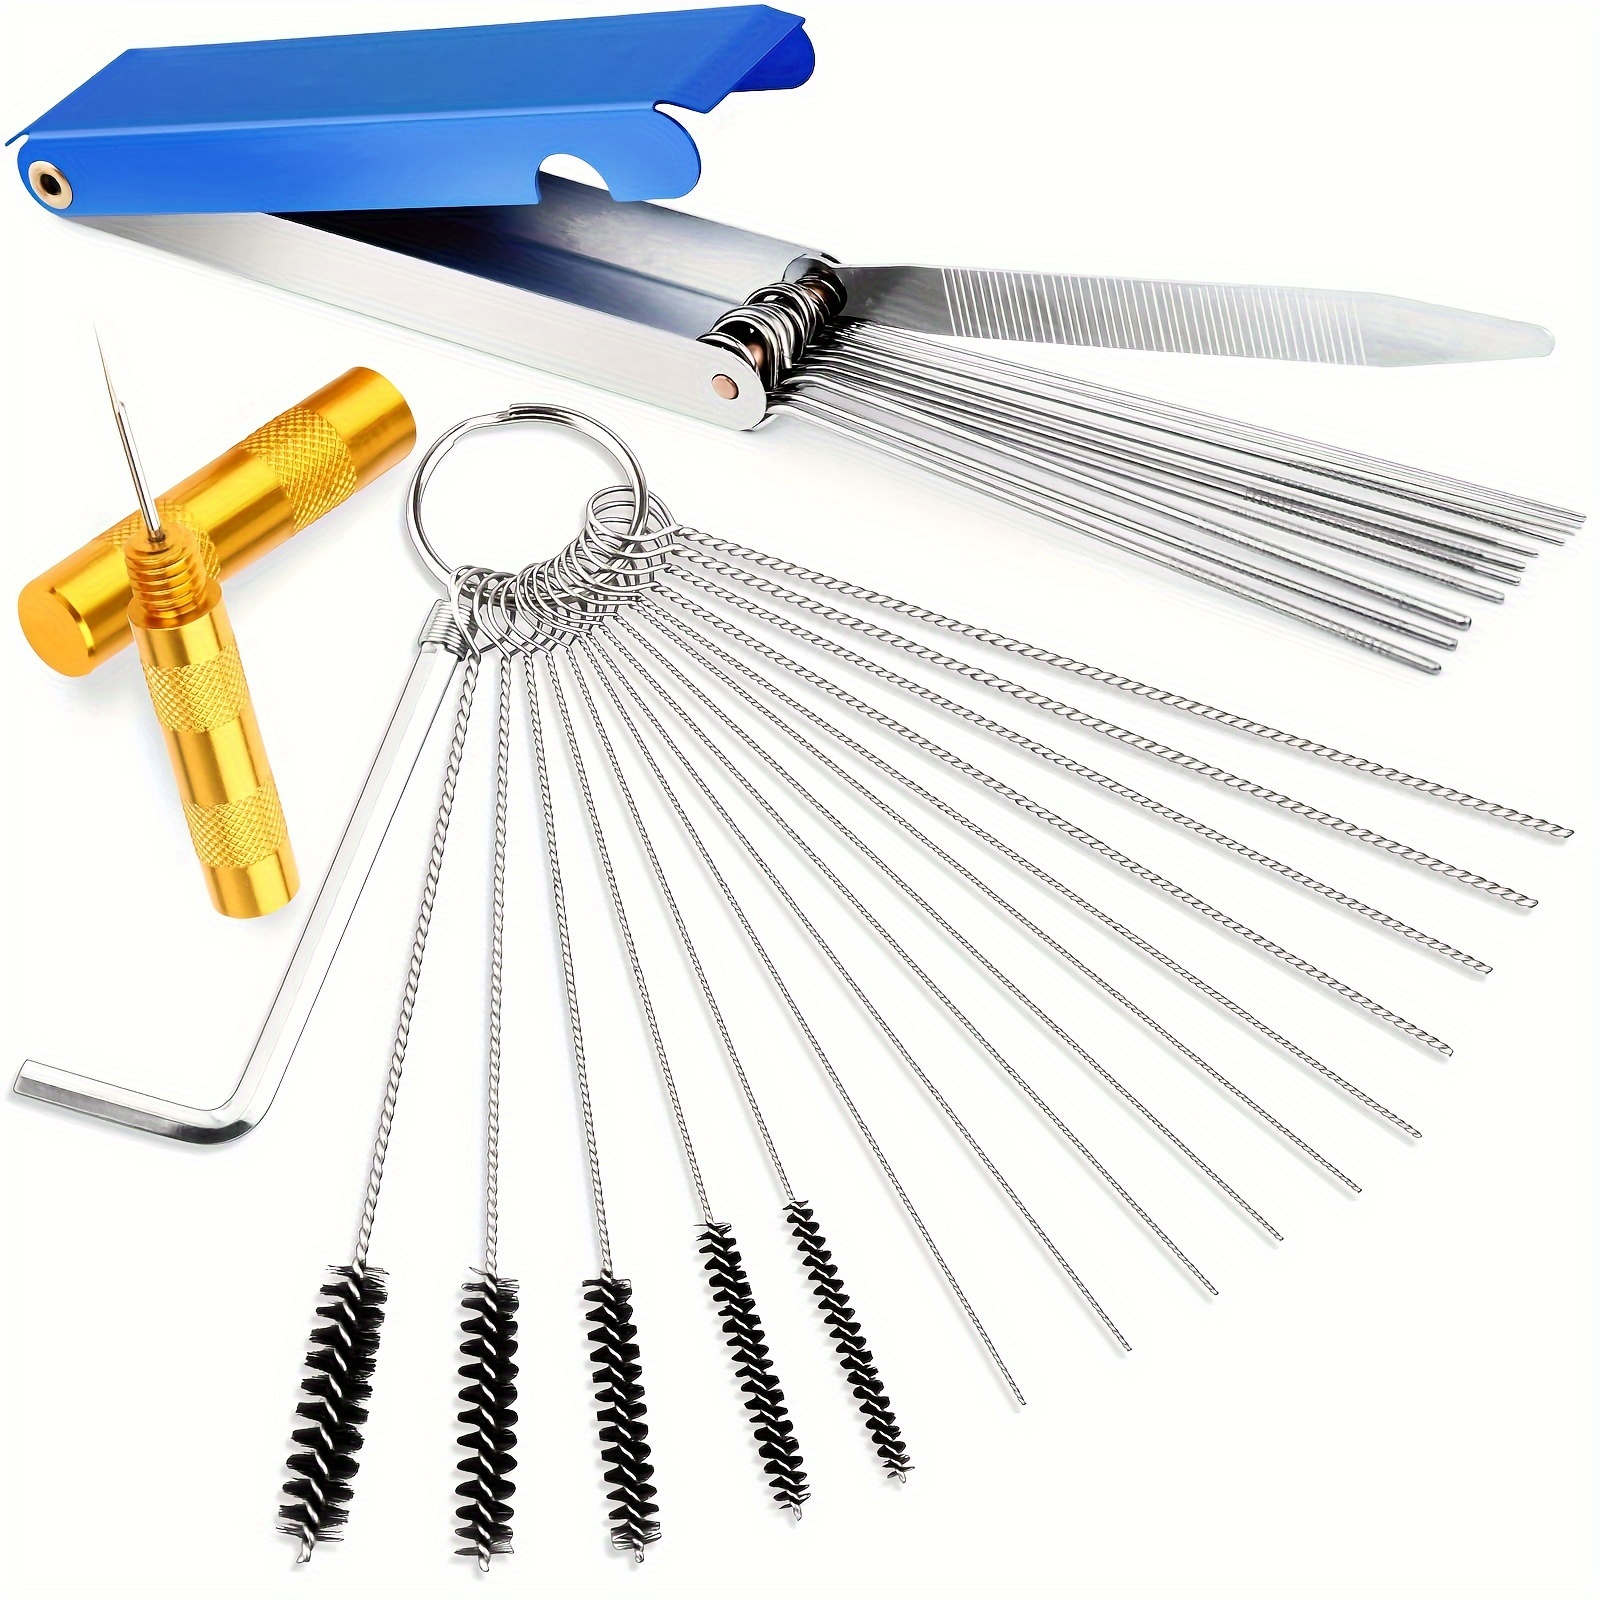 

Torch Tip Cleaner Carburetor Cleaning Kit Stainless Steel 13 Cleaning Wires Set 5 Nylon Brushes 10 Cleaning Needles 1 Throttle Wrench 1 Sharp Pick